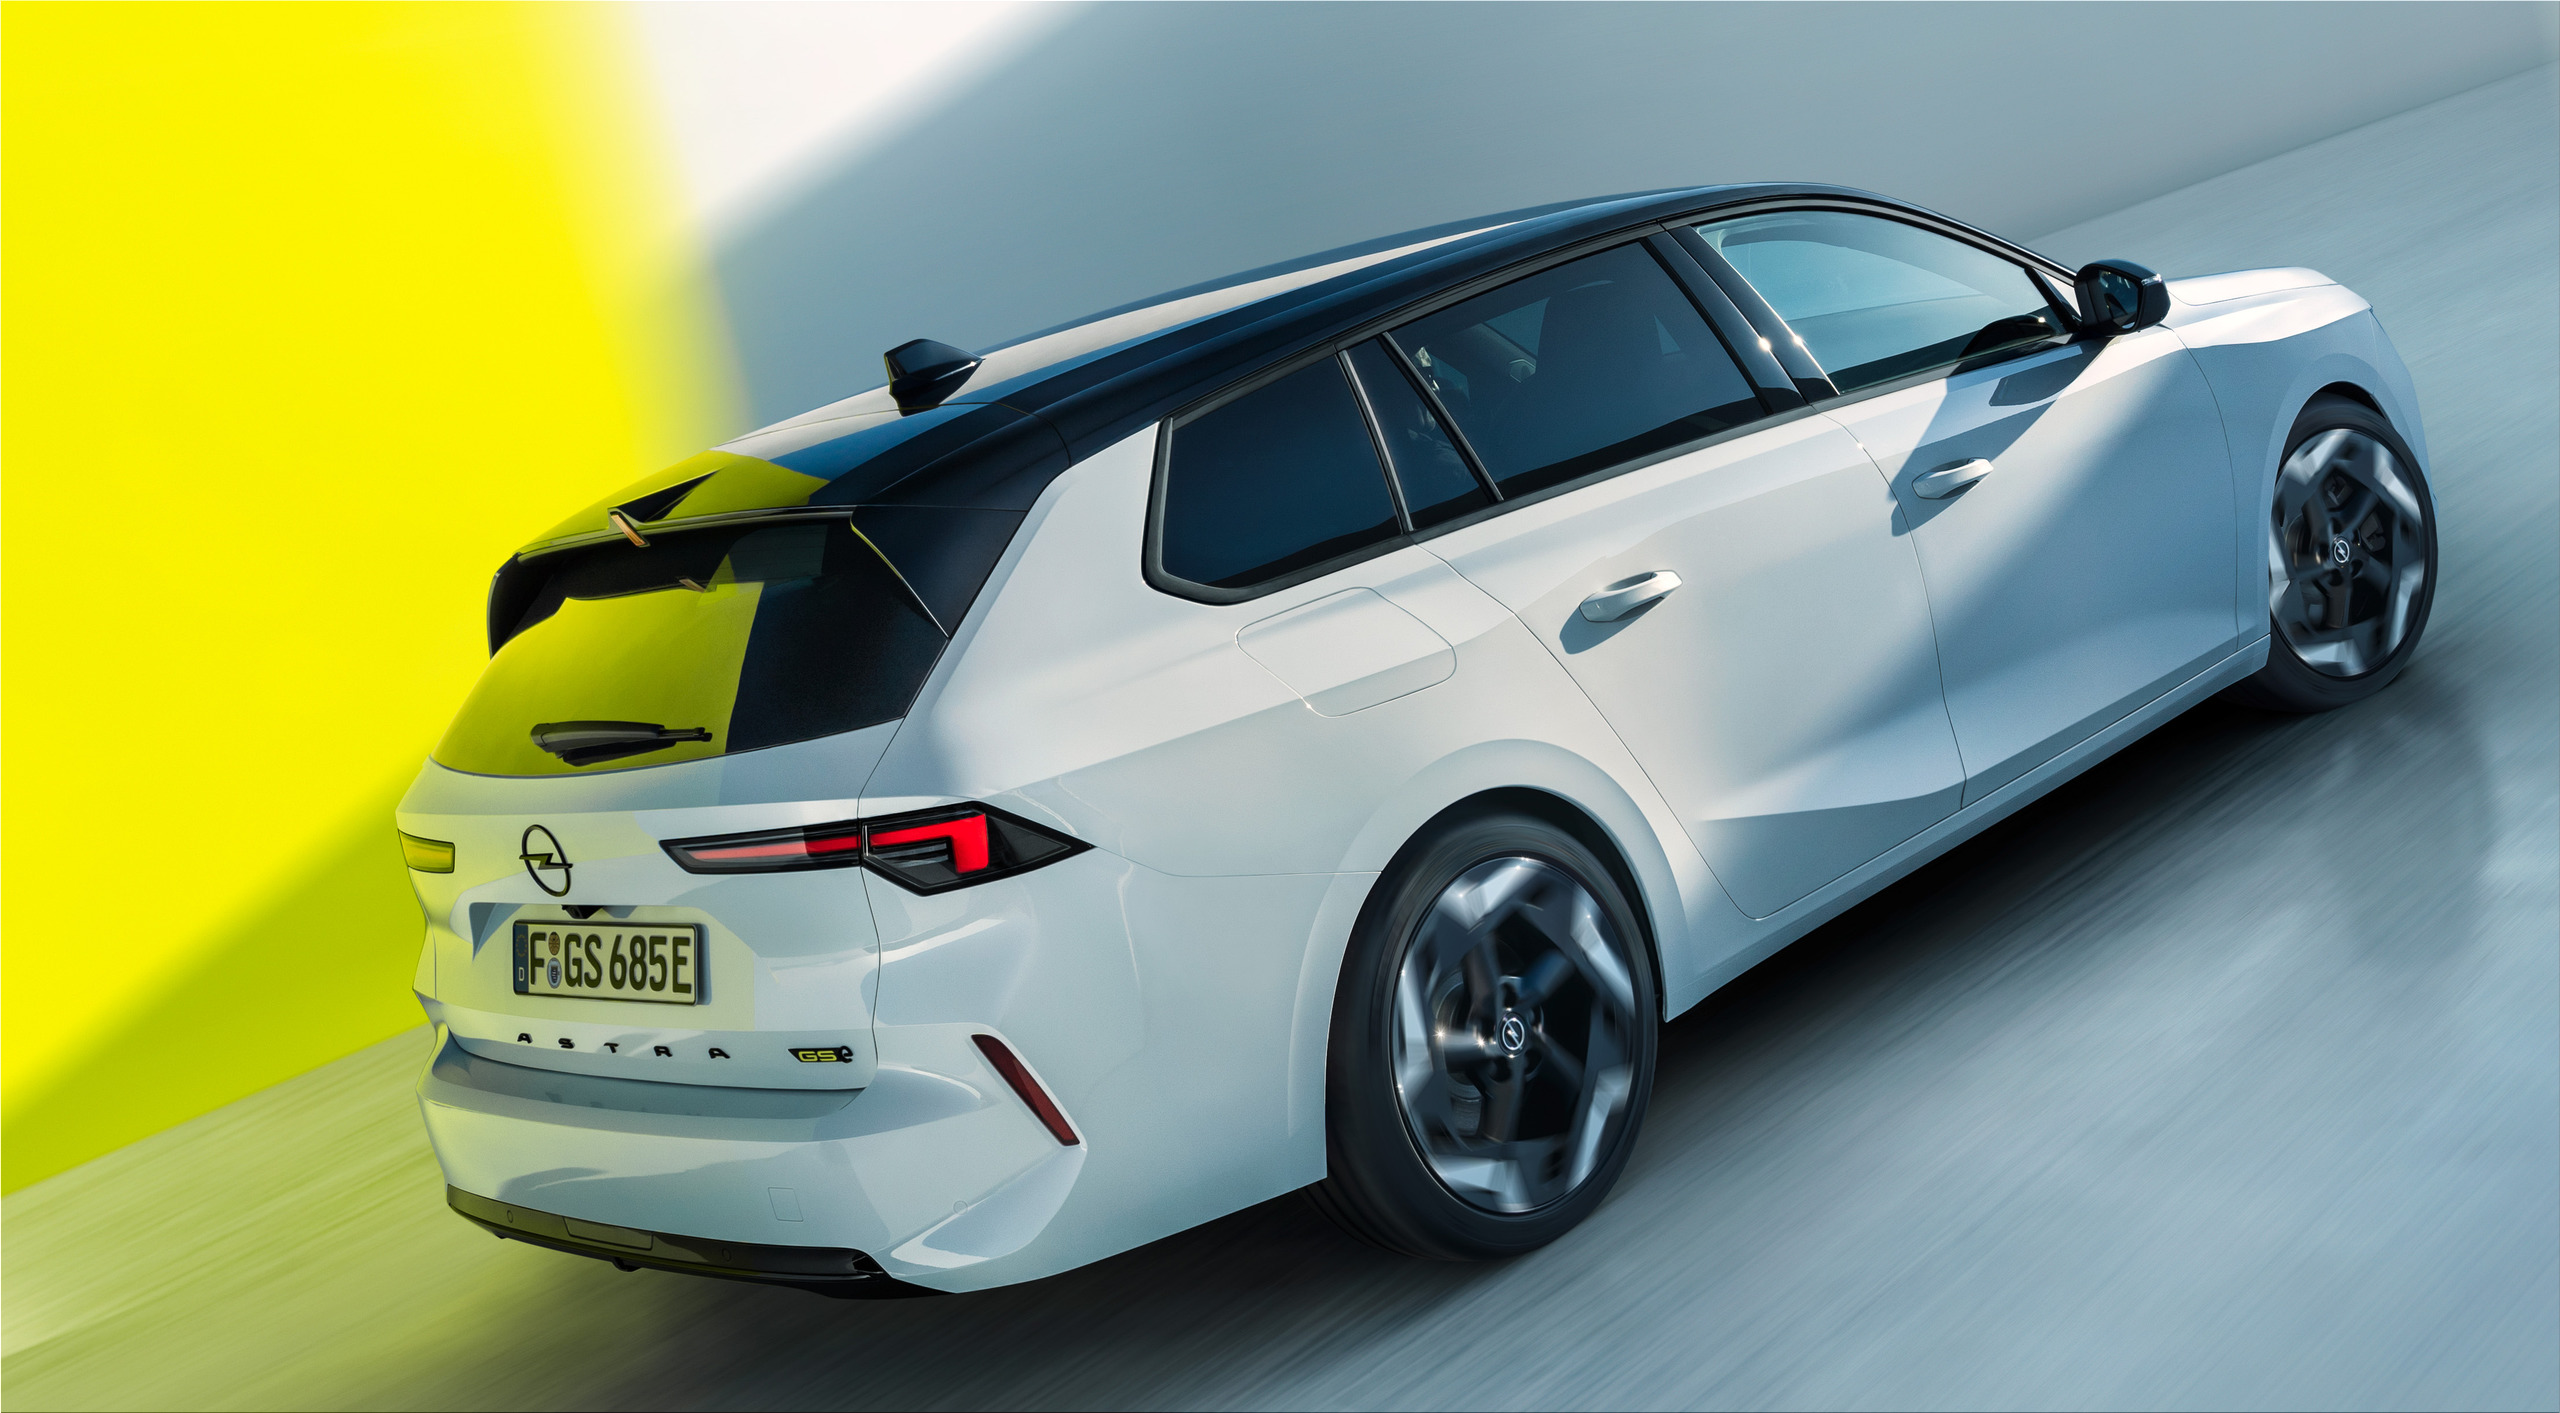 Opel Astra wagon joins hatchback with 2 plug-in hybrid options